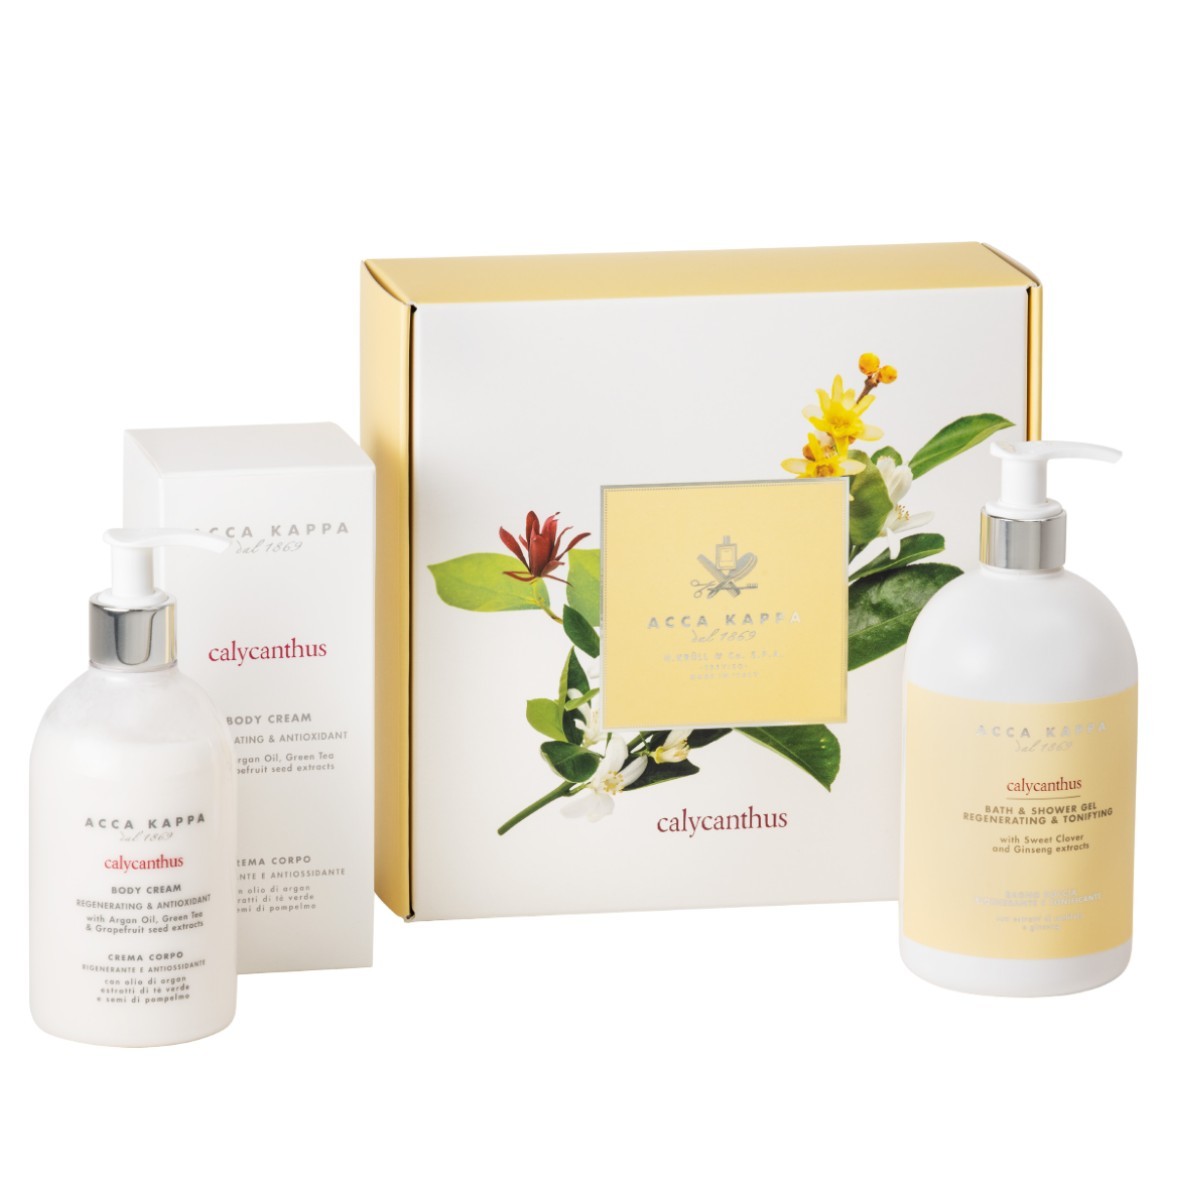 ACCA KAPPA Calycanthus Gift Set of Shower Gel and Body Lotion